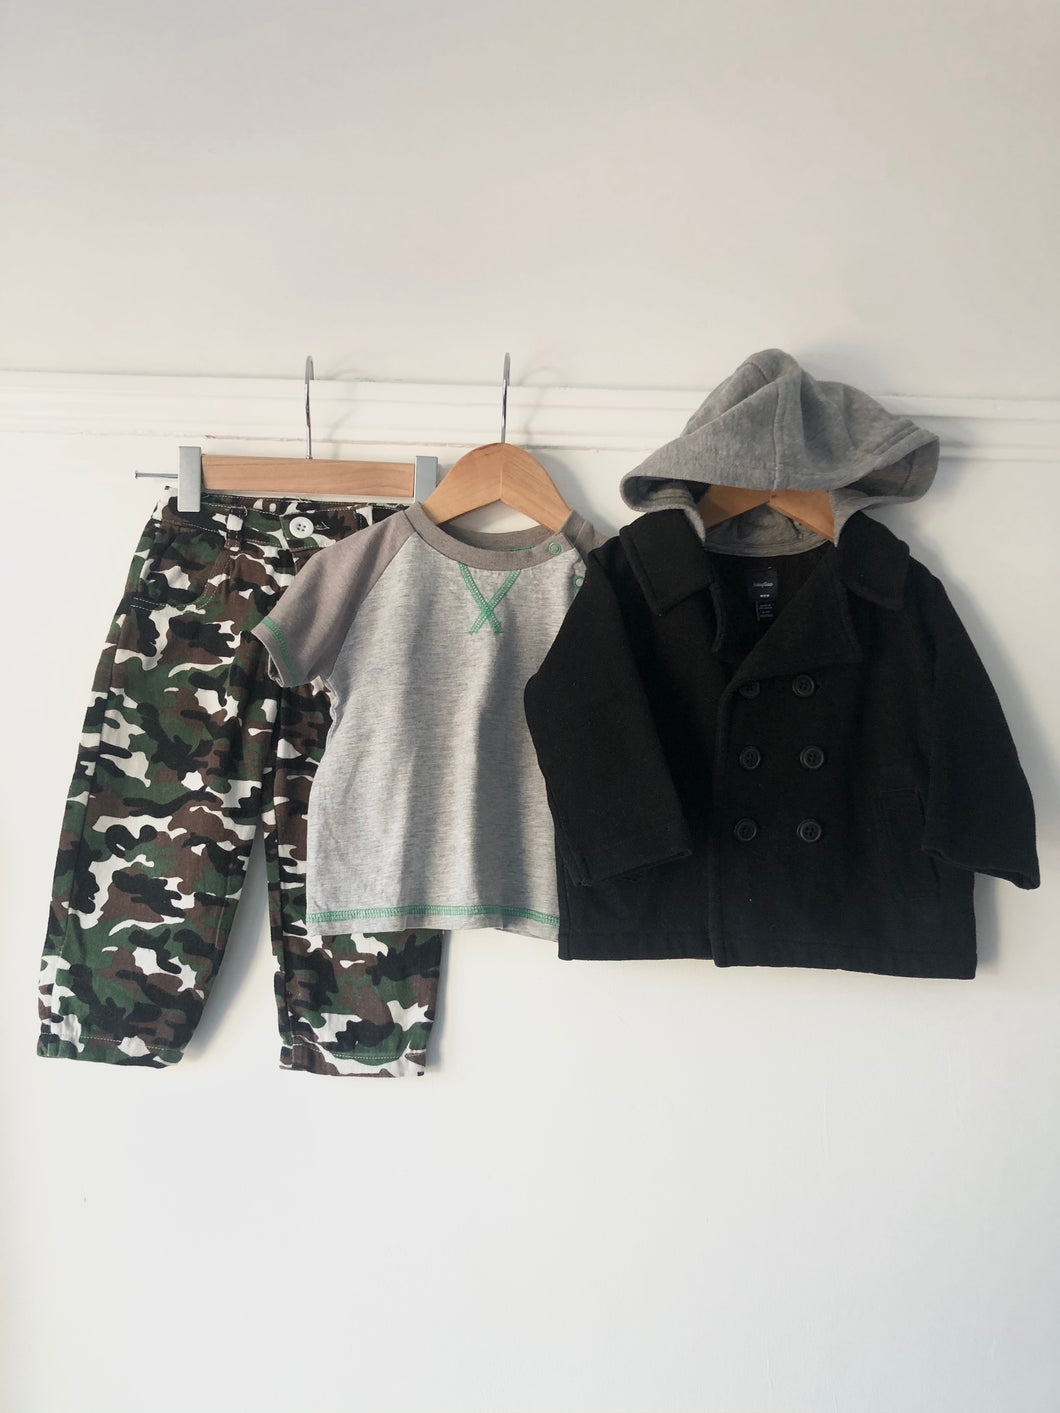 Includes:  Military trousers (Unknown - 90)  Shot sleeved green and grey t-shirt (Tu - 6 to 9 months)  Black cotton jacket with grey hoodie (Baby Gap - 6 to 12 months)